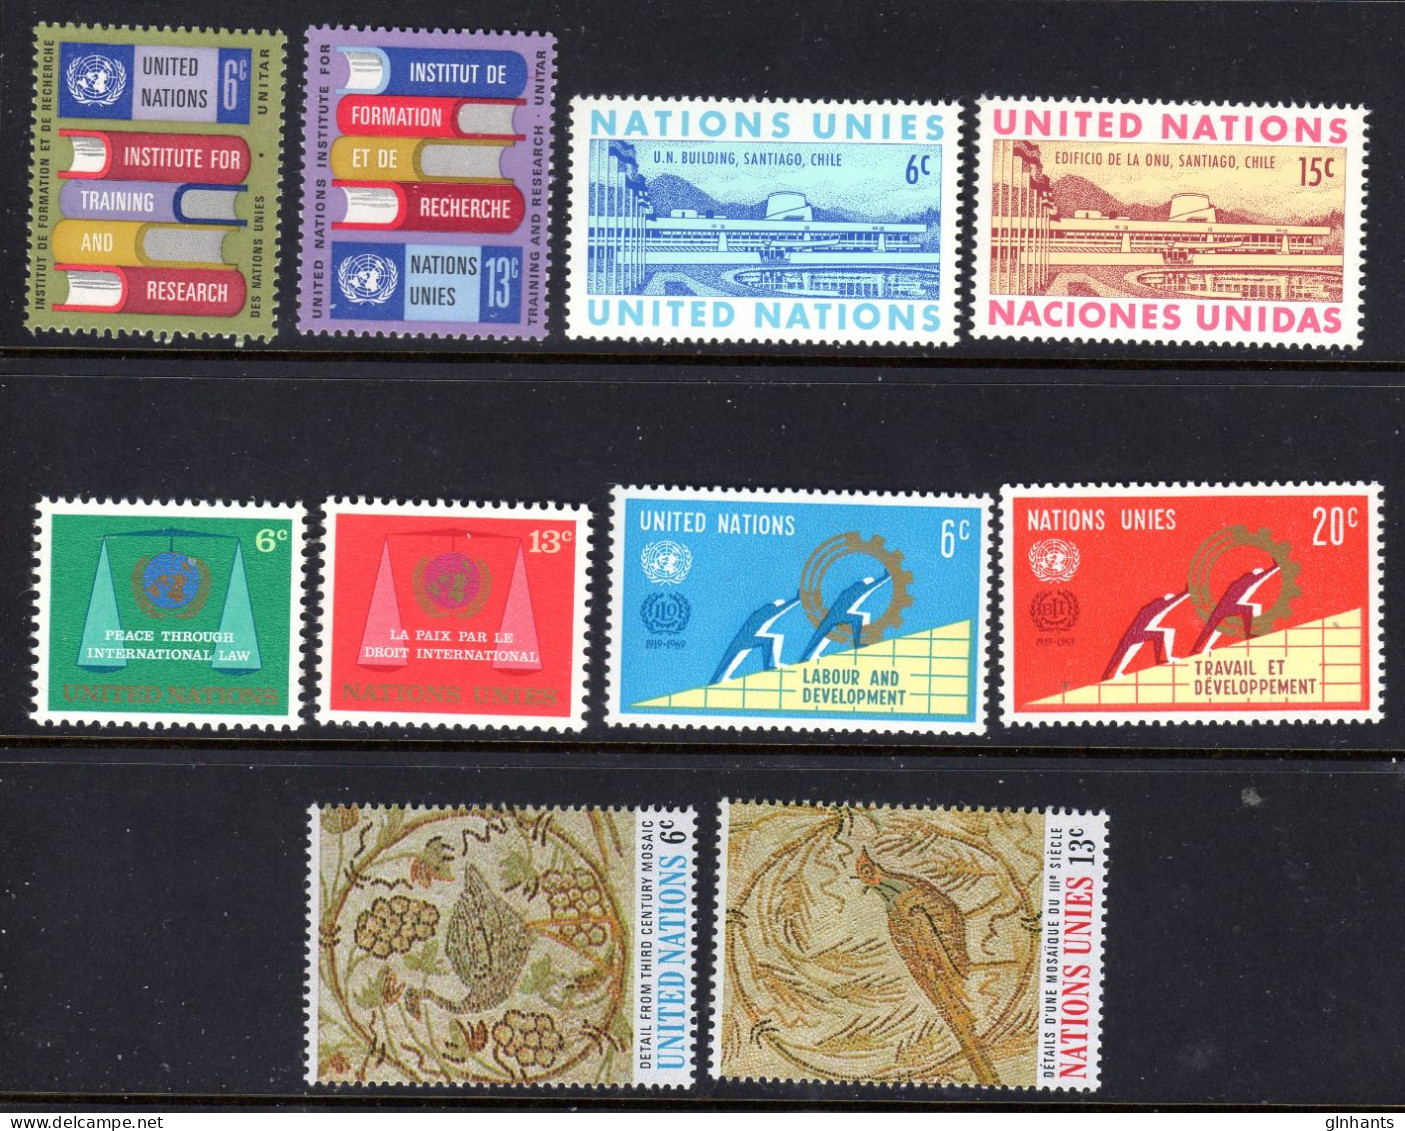 UNITED NATIONS UN NEW YORK - 1969 COMPLETE YEAR SET (10V) AS PICTURED FINE MNH ** SG 193-202 - Ungebraucht